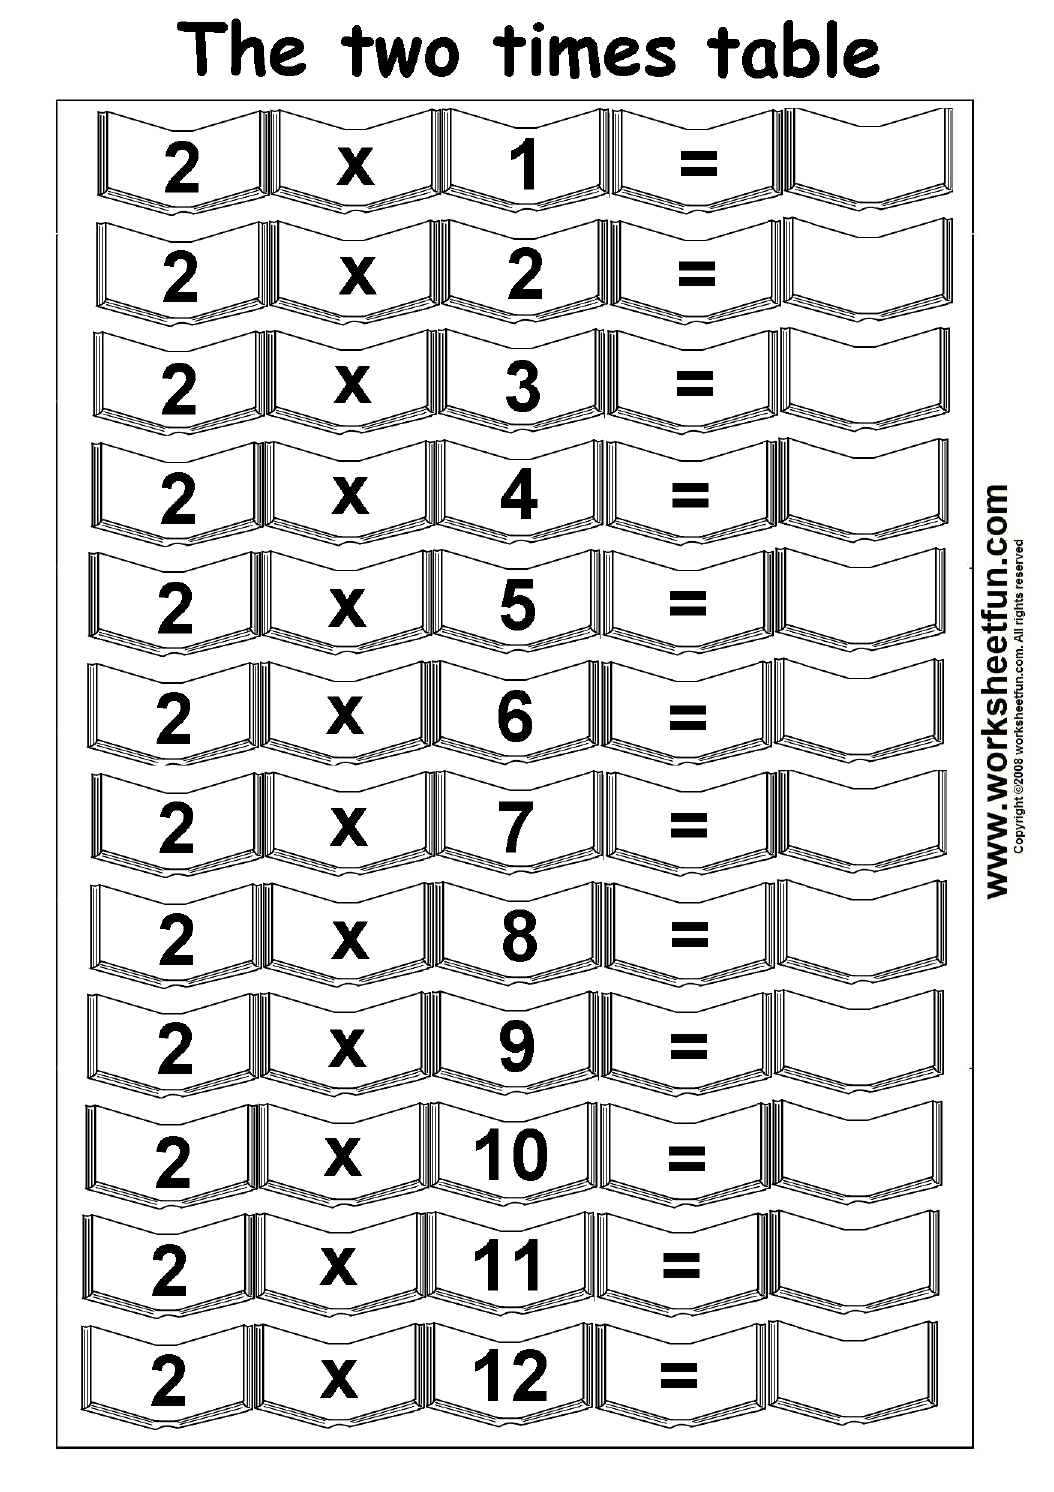  Multiplication Times Tables Worksheets 2 3 4 5 Times Tables Four Worksheets FREE 